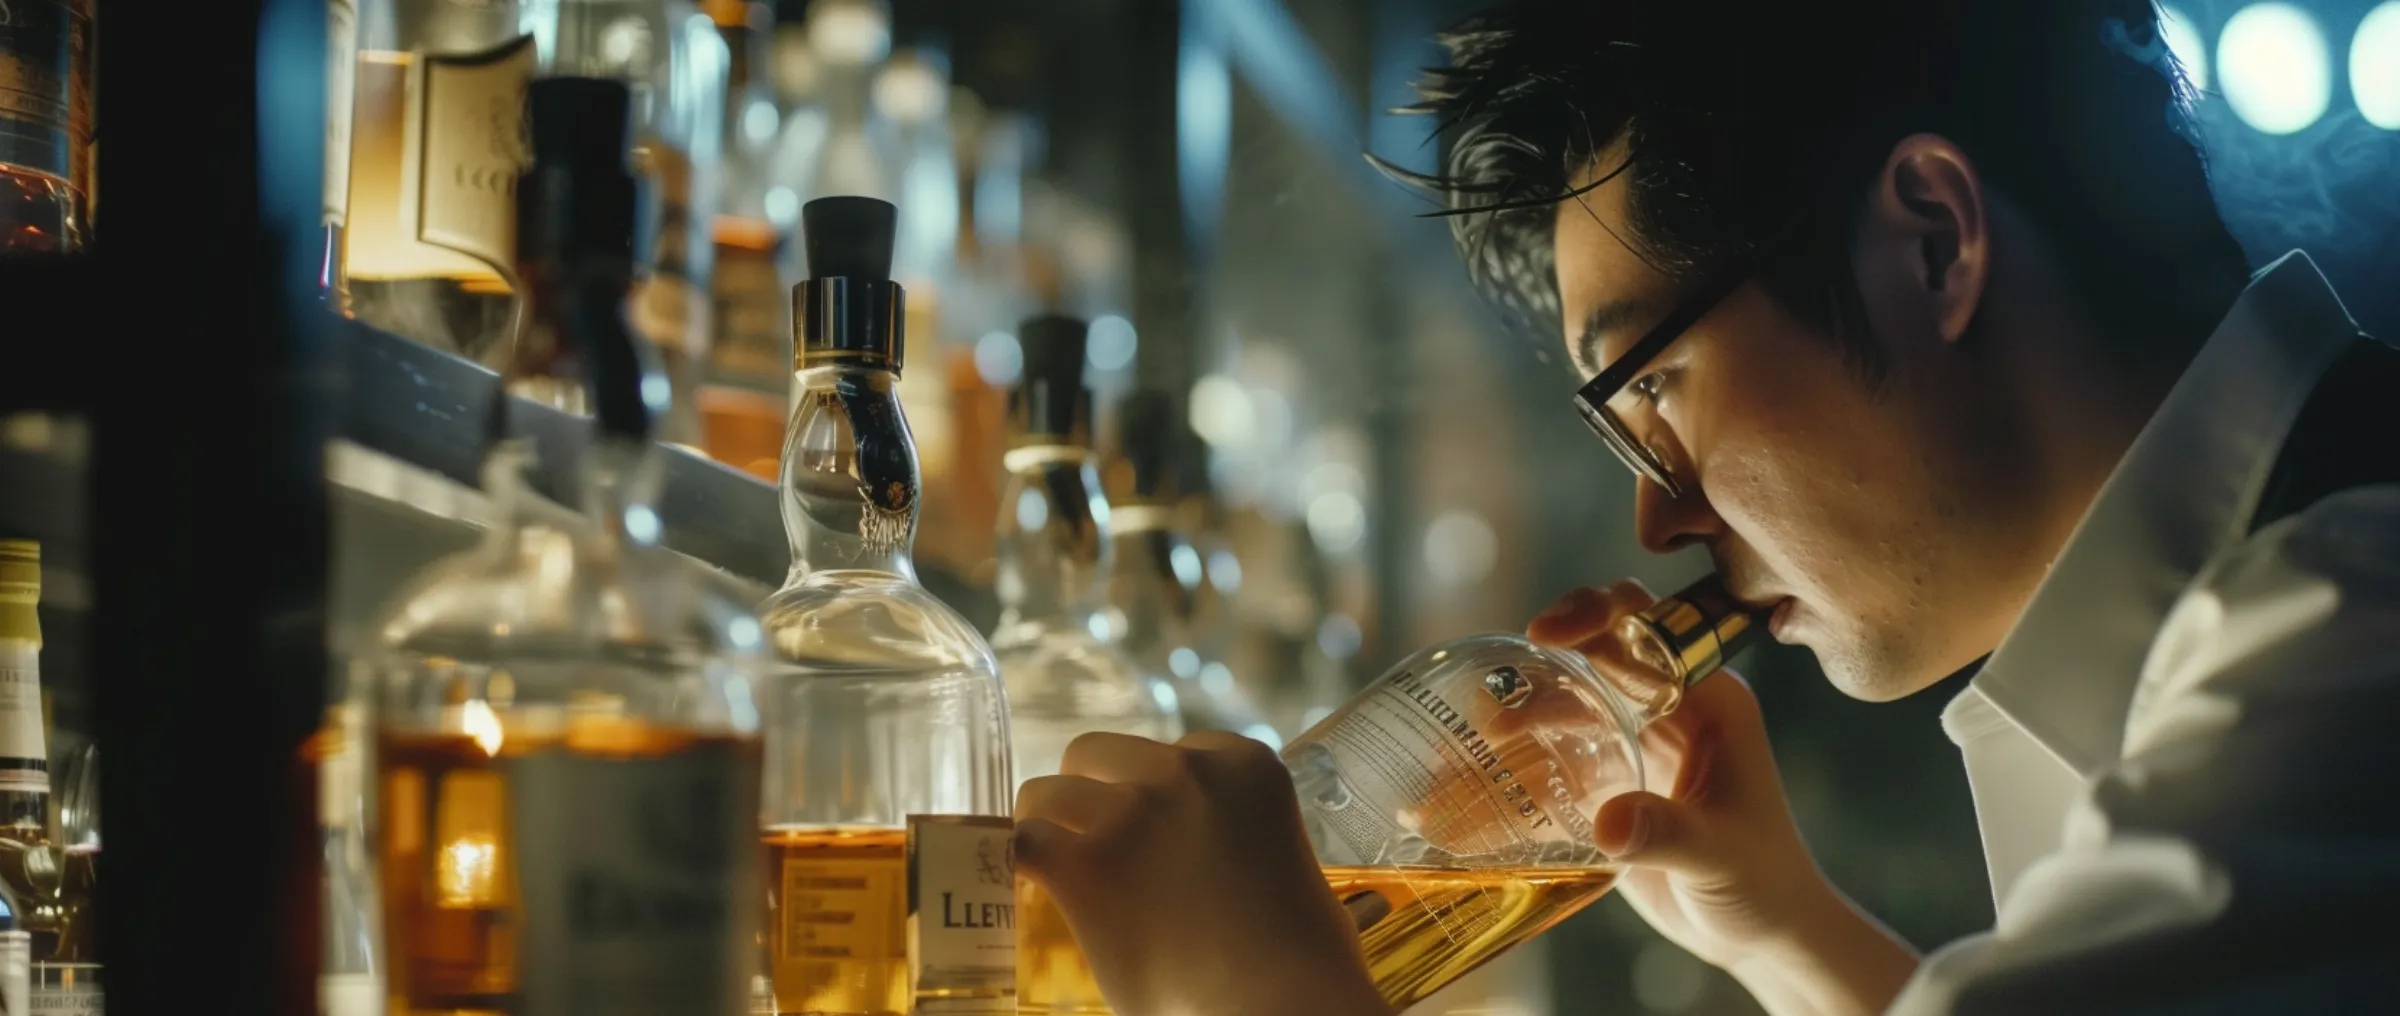 The Glenlivet used AI and blockchain to sell exclusive whisky